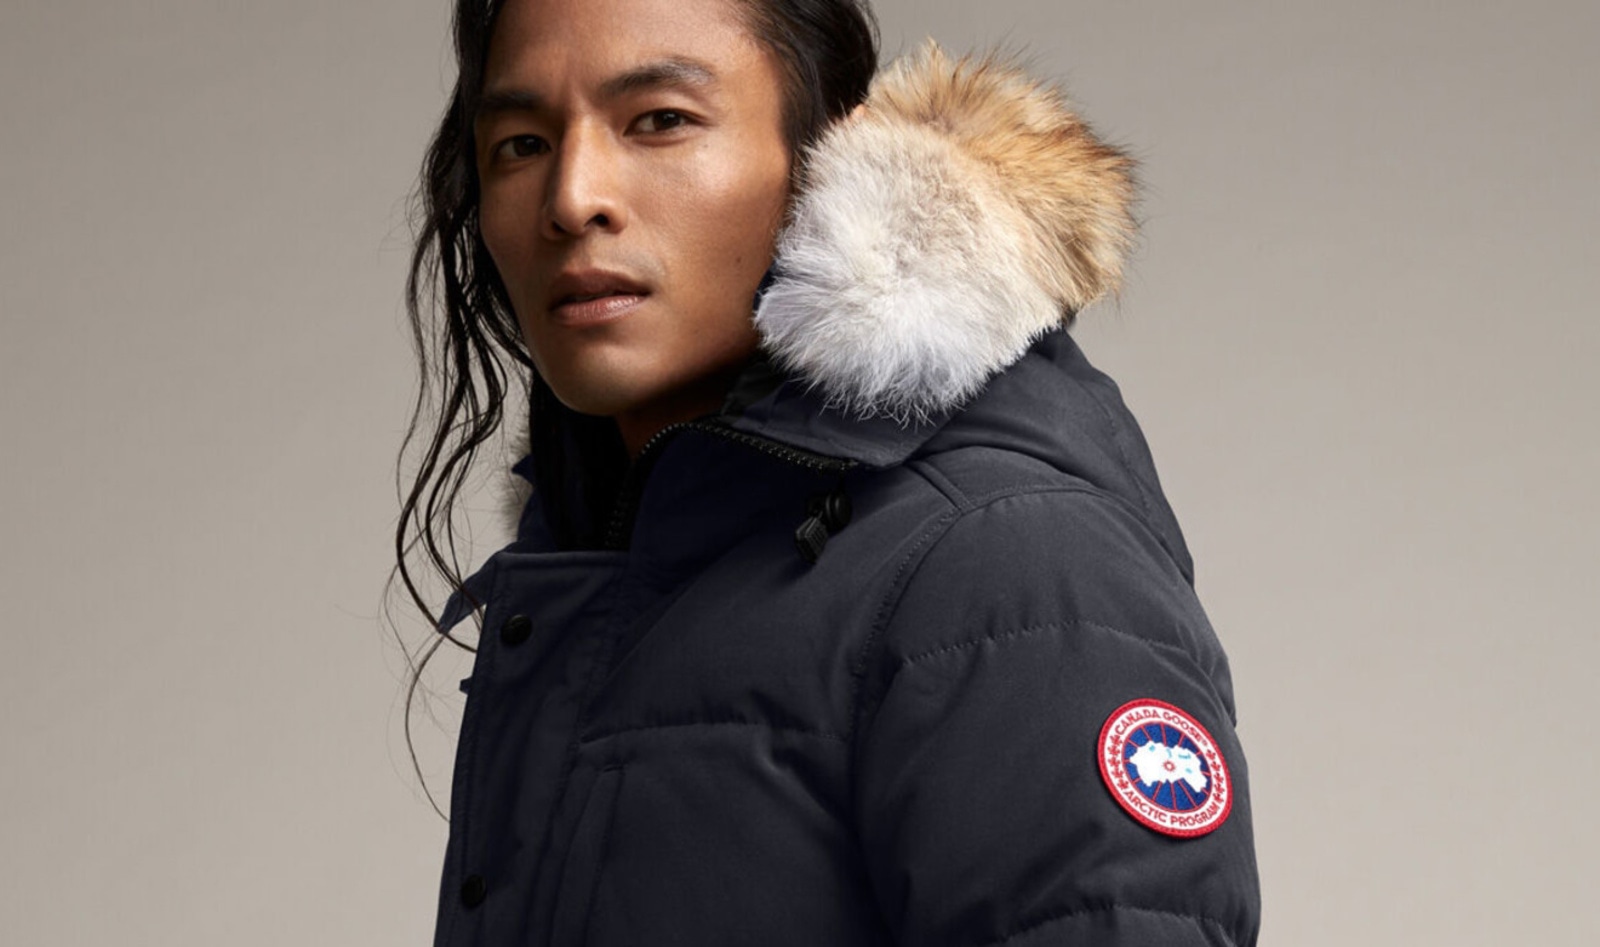 Canada Goose Commits to Going Fur-Free by End of 2022